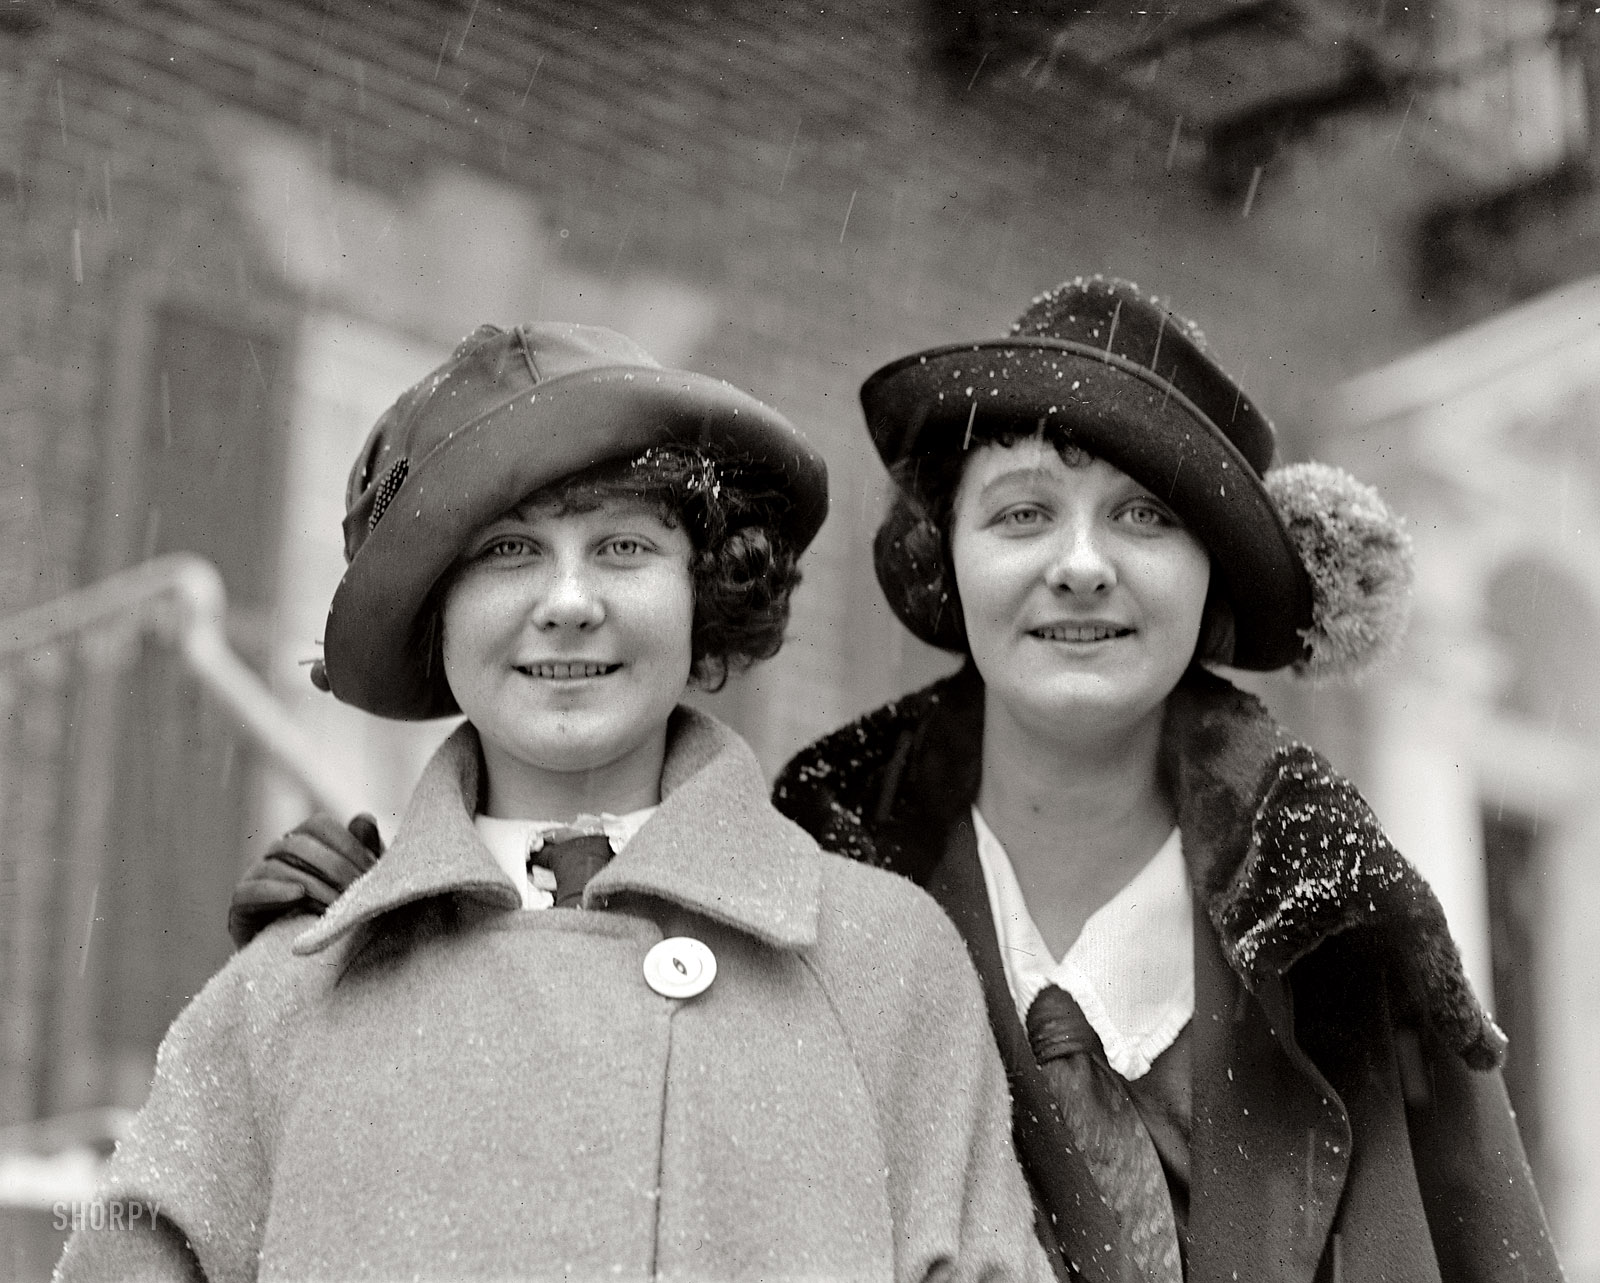 February 15, 1922. Washington, D.C. "Laura and Inga Bryn." The daughter and wife of Norway's ambassador. National Photo glass negative. View full size.